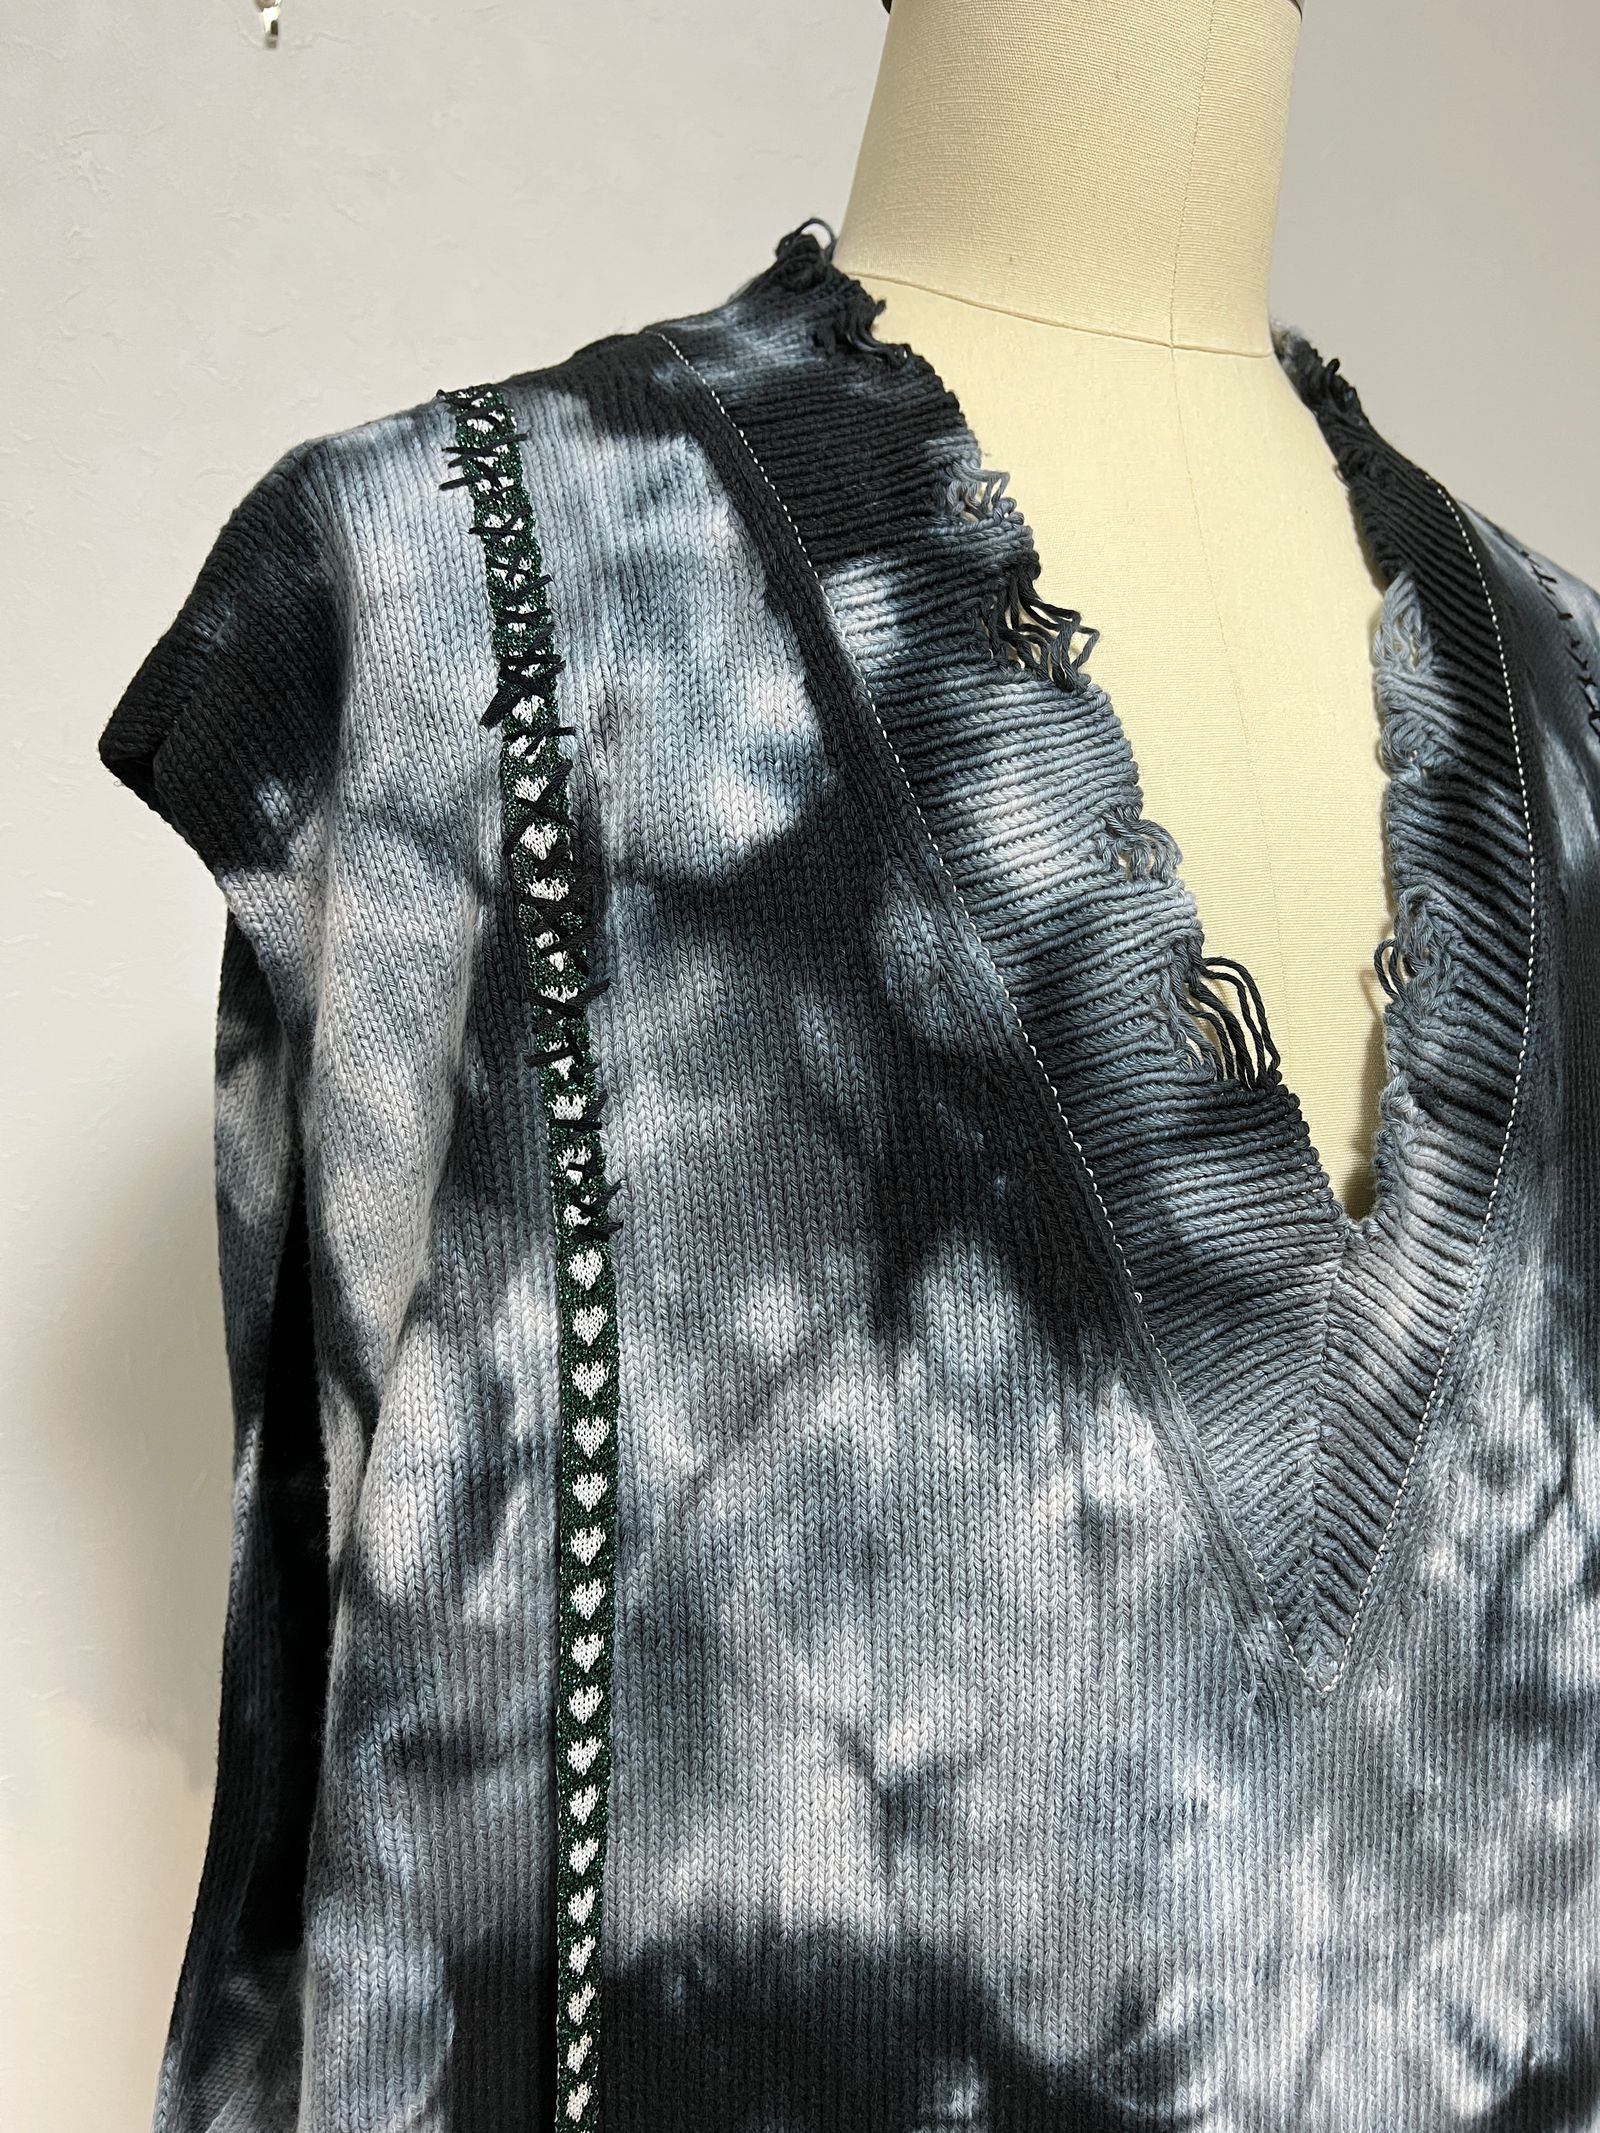 KIDILL - ニットベスト - KNIT VEST - COLLABORATION WITH 